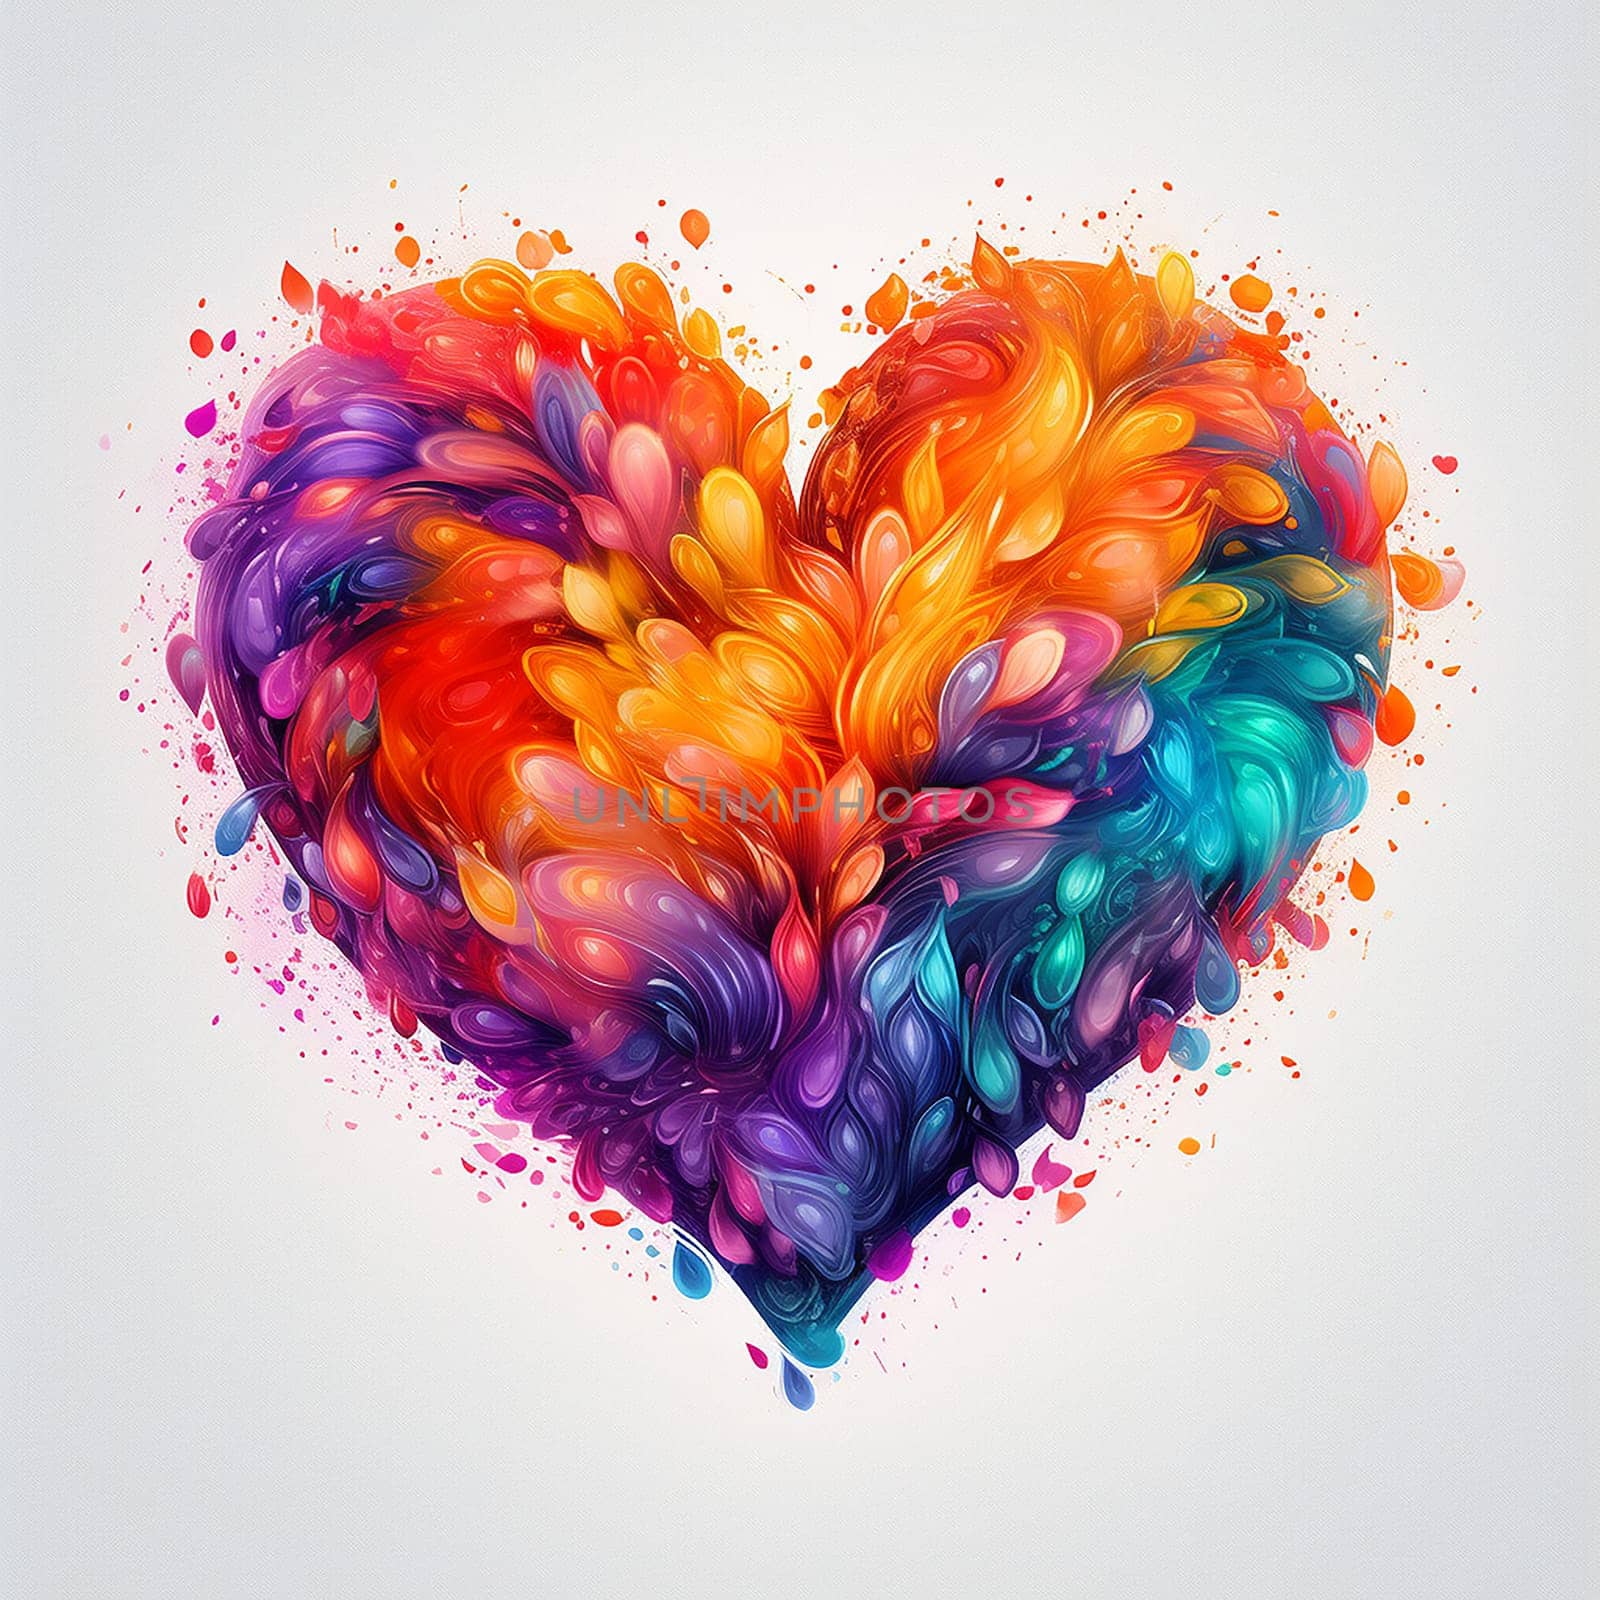 Colorful heart illustration with vibrant swirls representing love or emotion